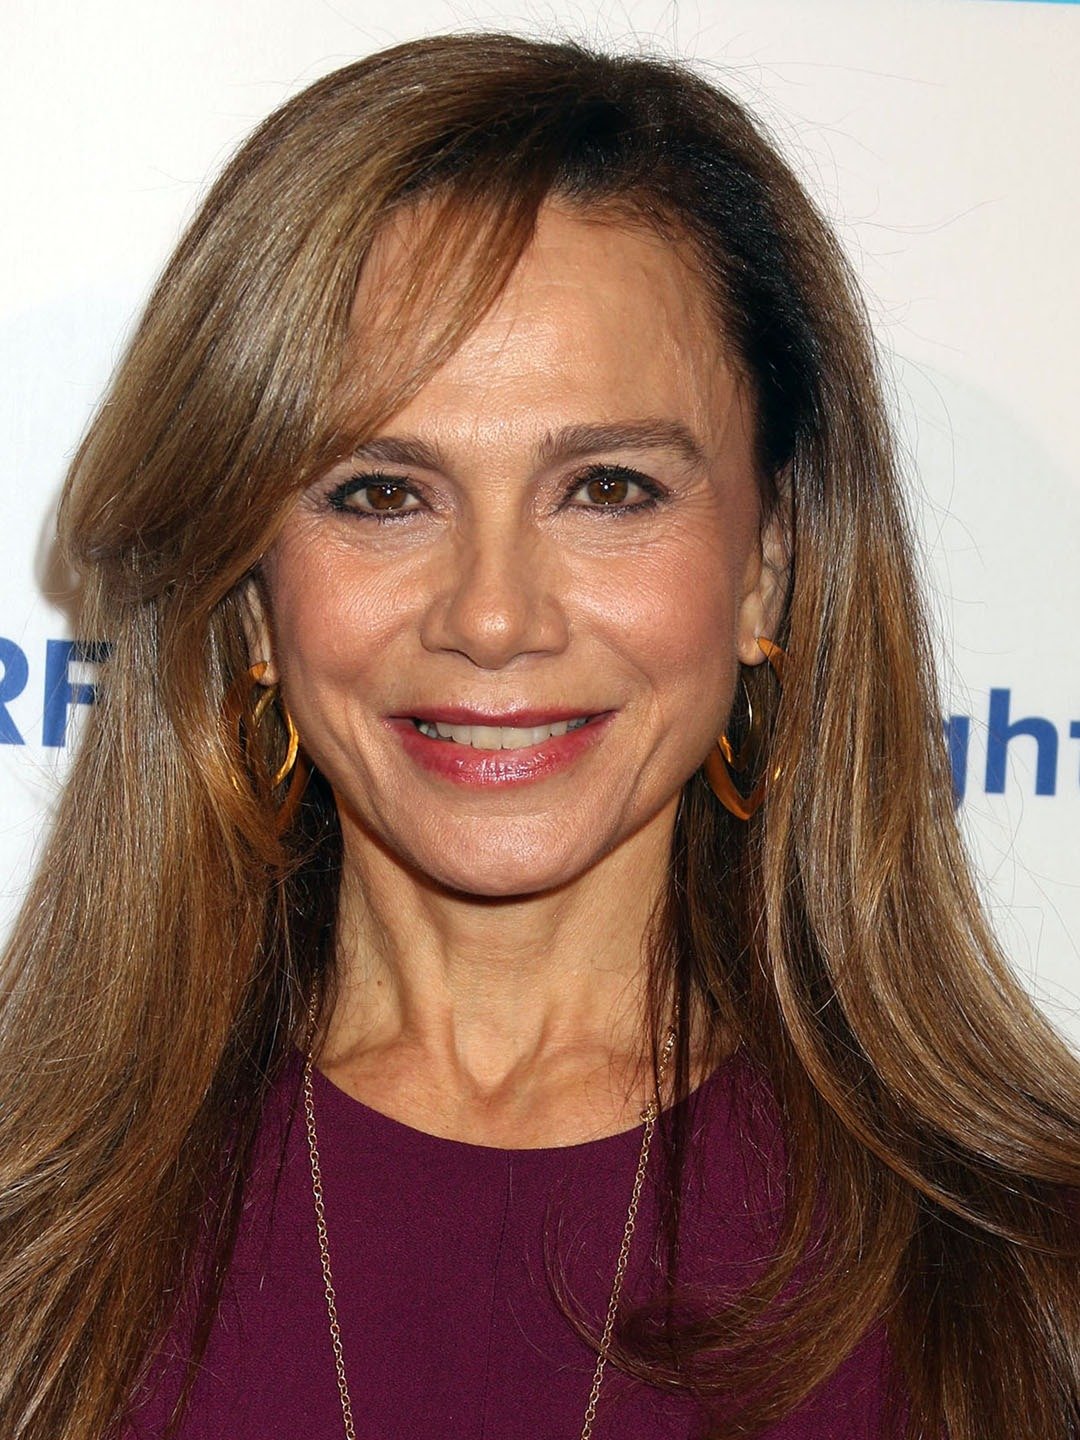 Does Lena Olin look typical for Sweden? 